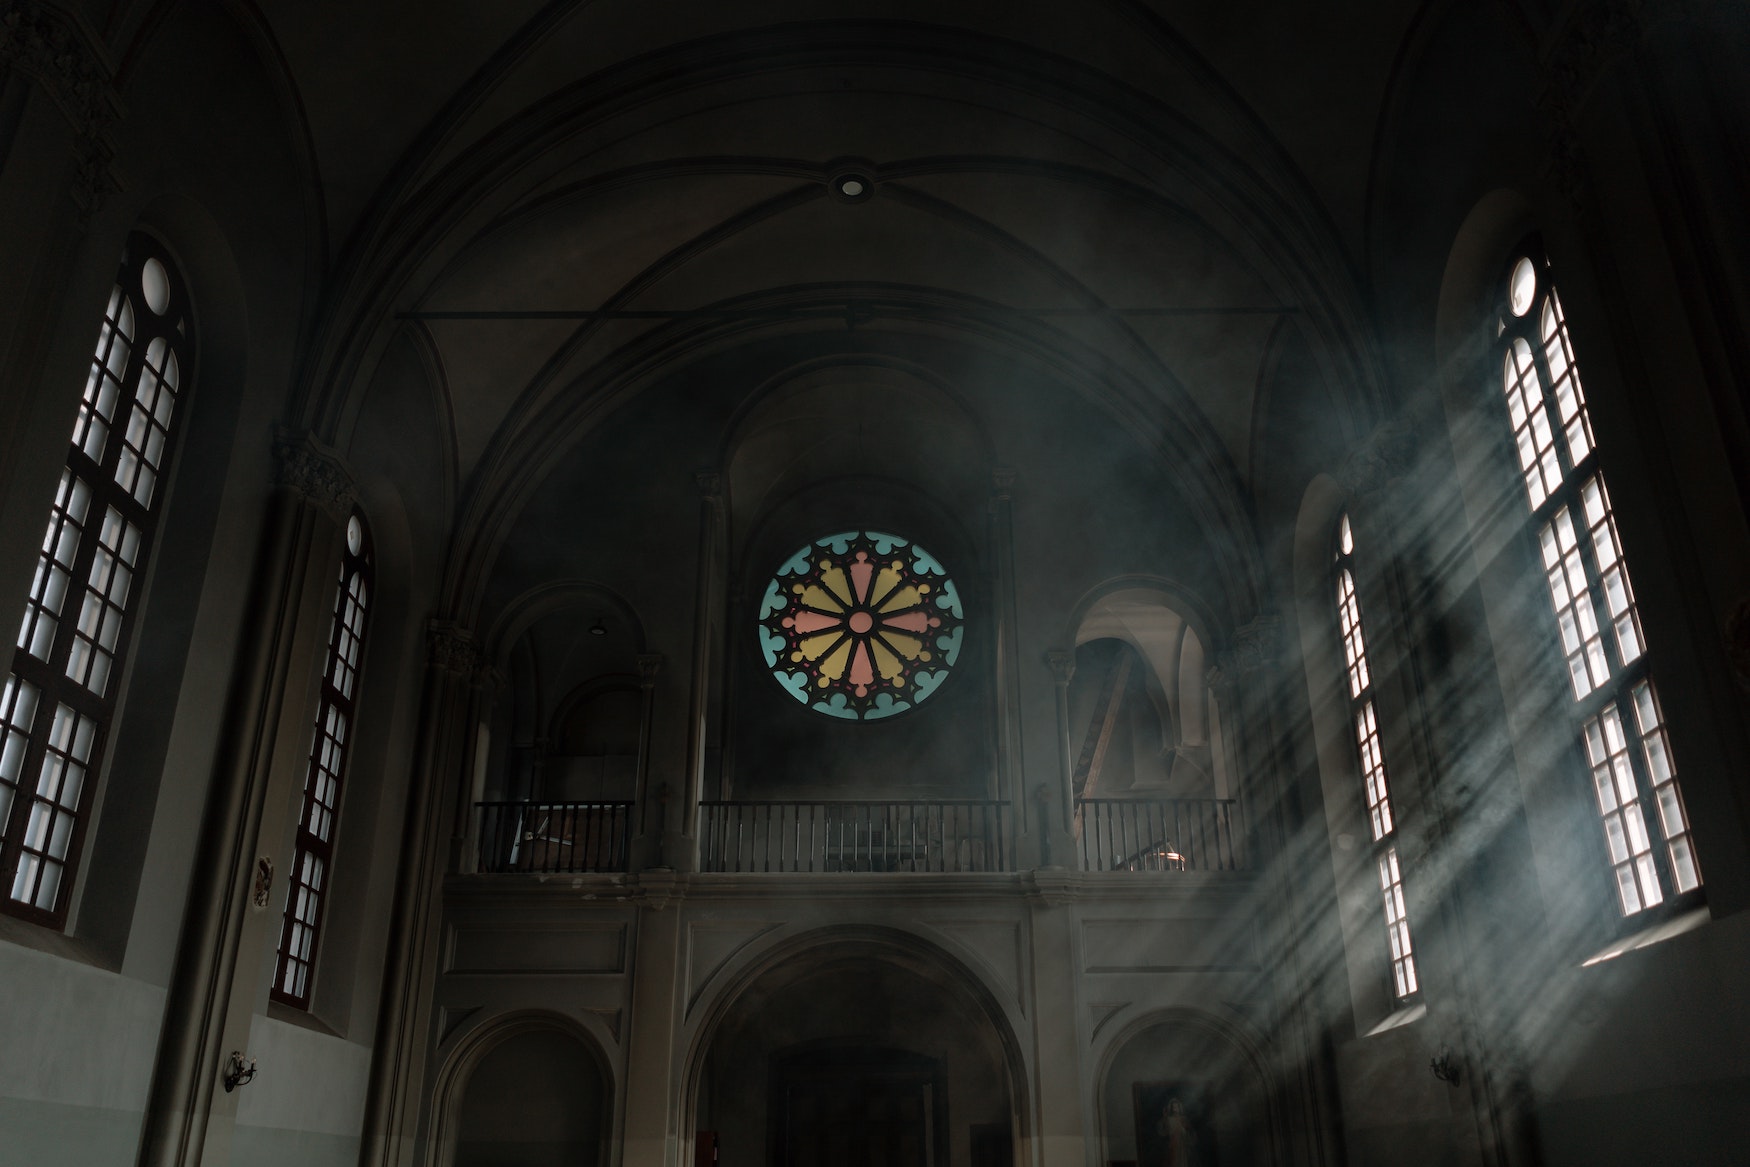 Sunlight shining into a dimly lit church with a stained glass window